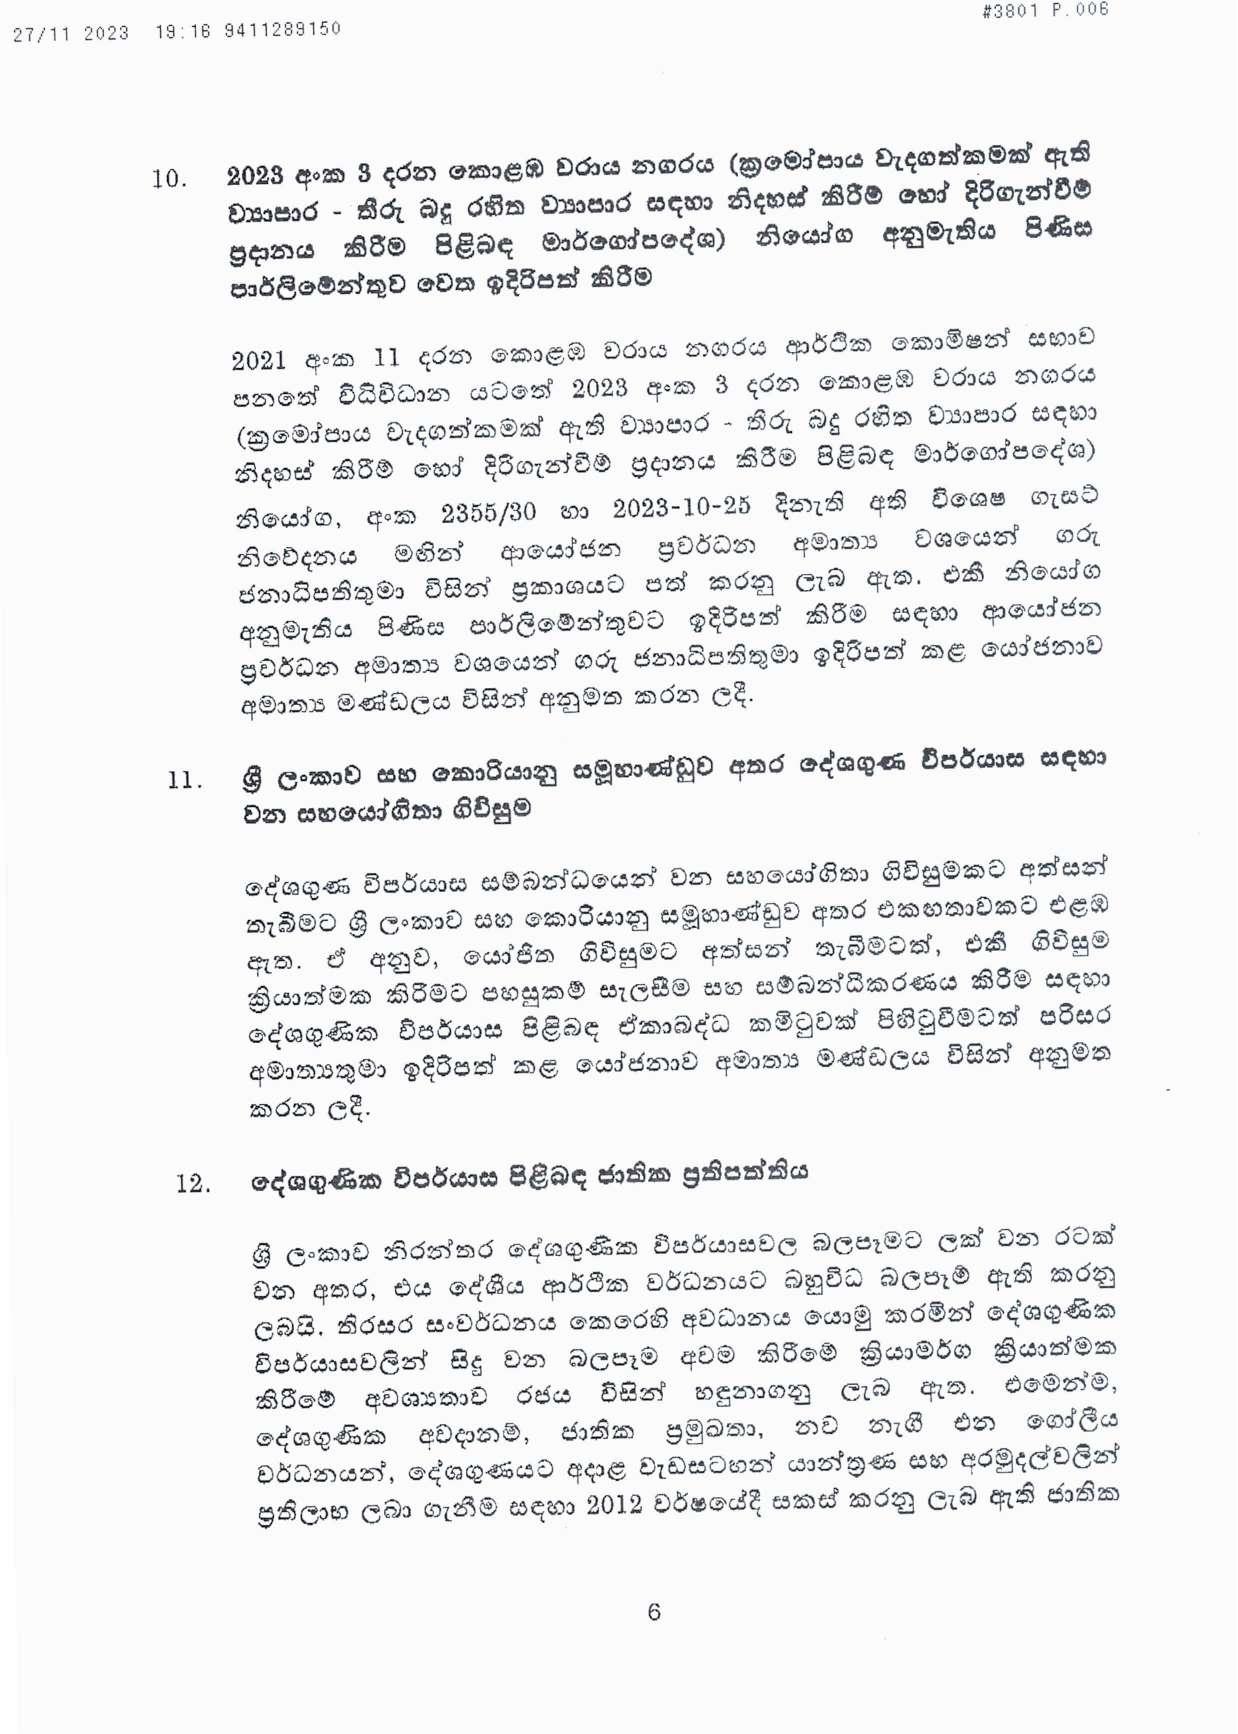 Cabinet Decision on 27.11.2023 page 006